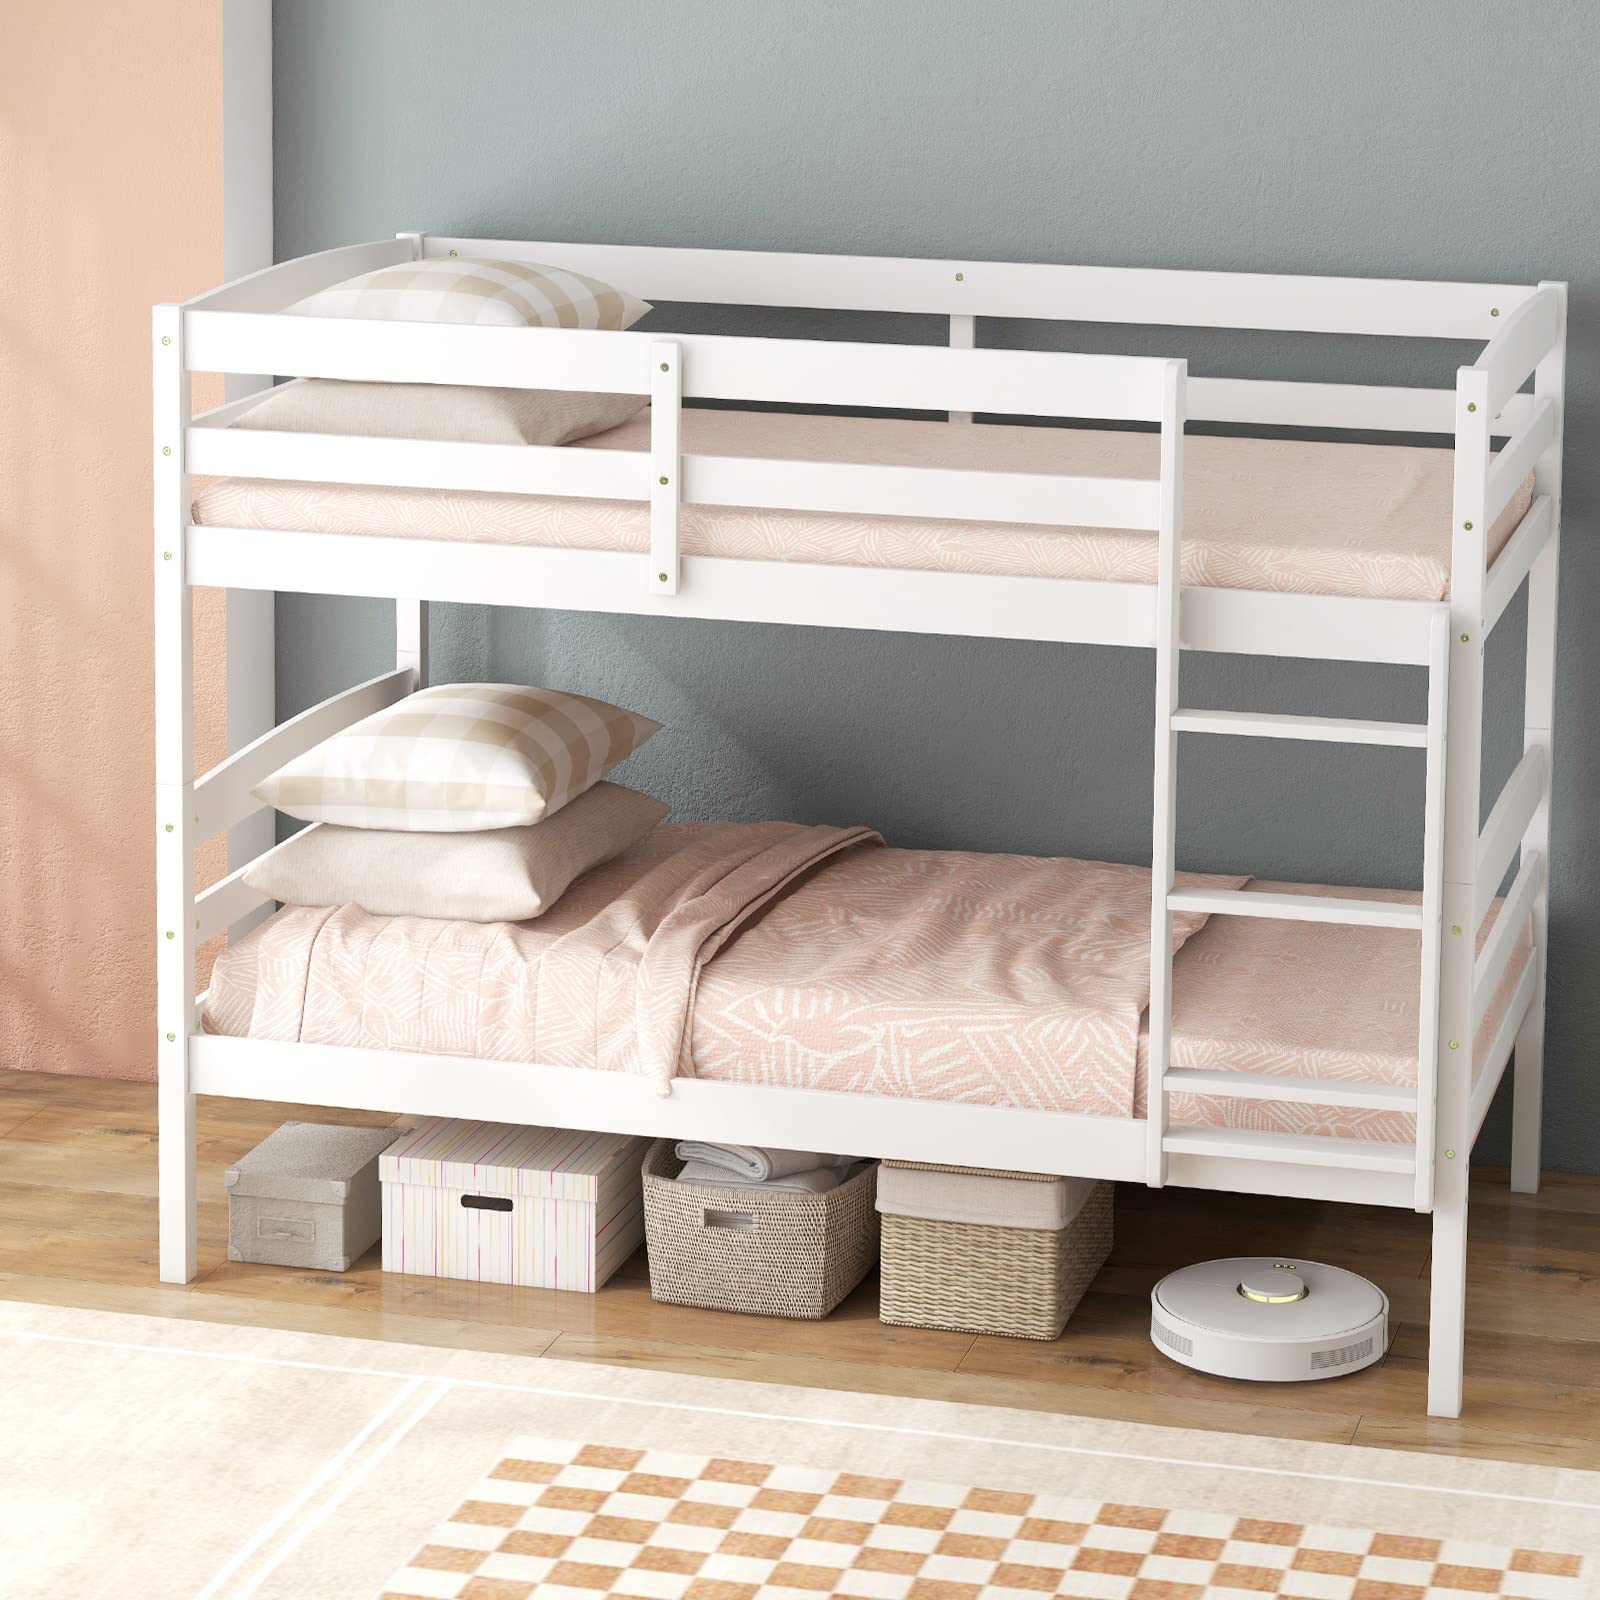 Giantex Bunk Bed, Solid Wood Detachable Bed Frame with High Guardrails & Integrated Ladder